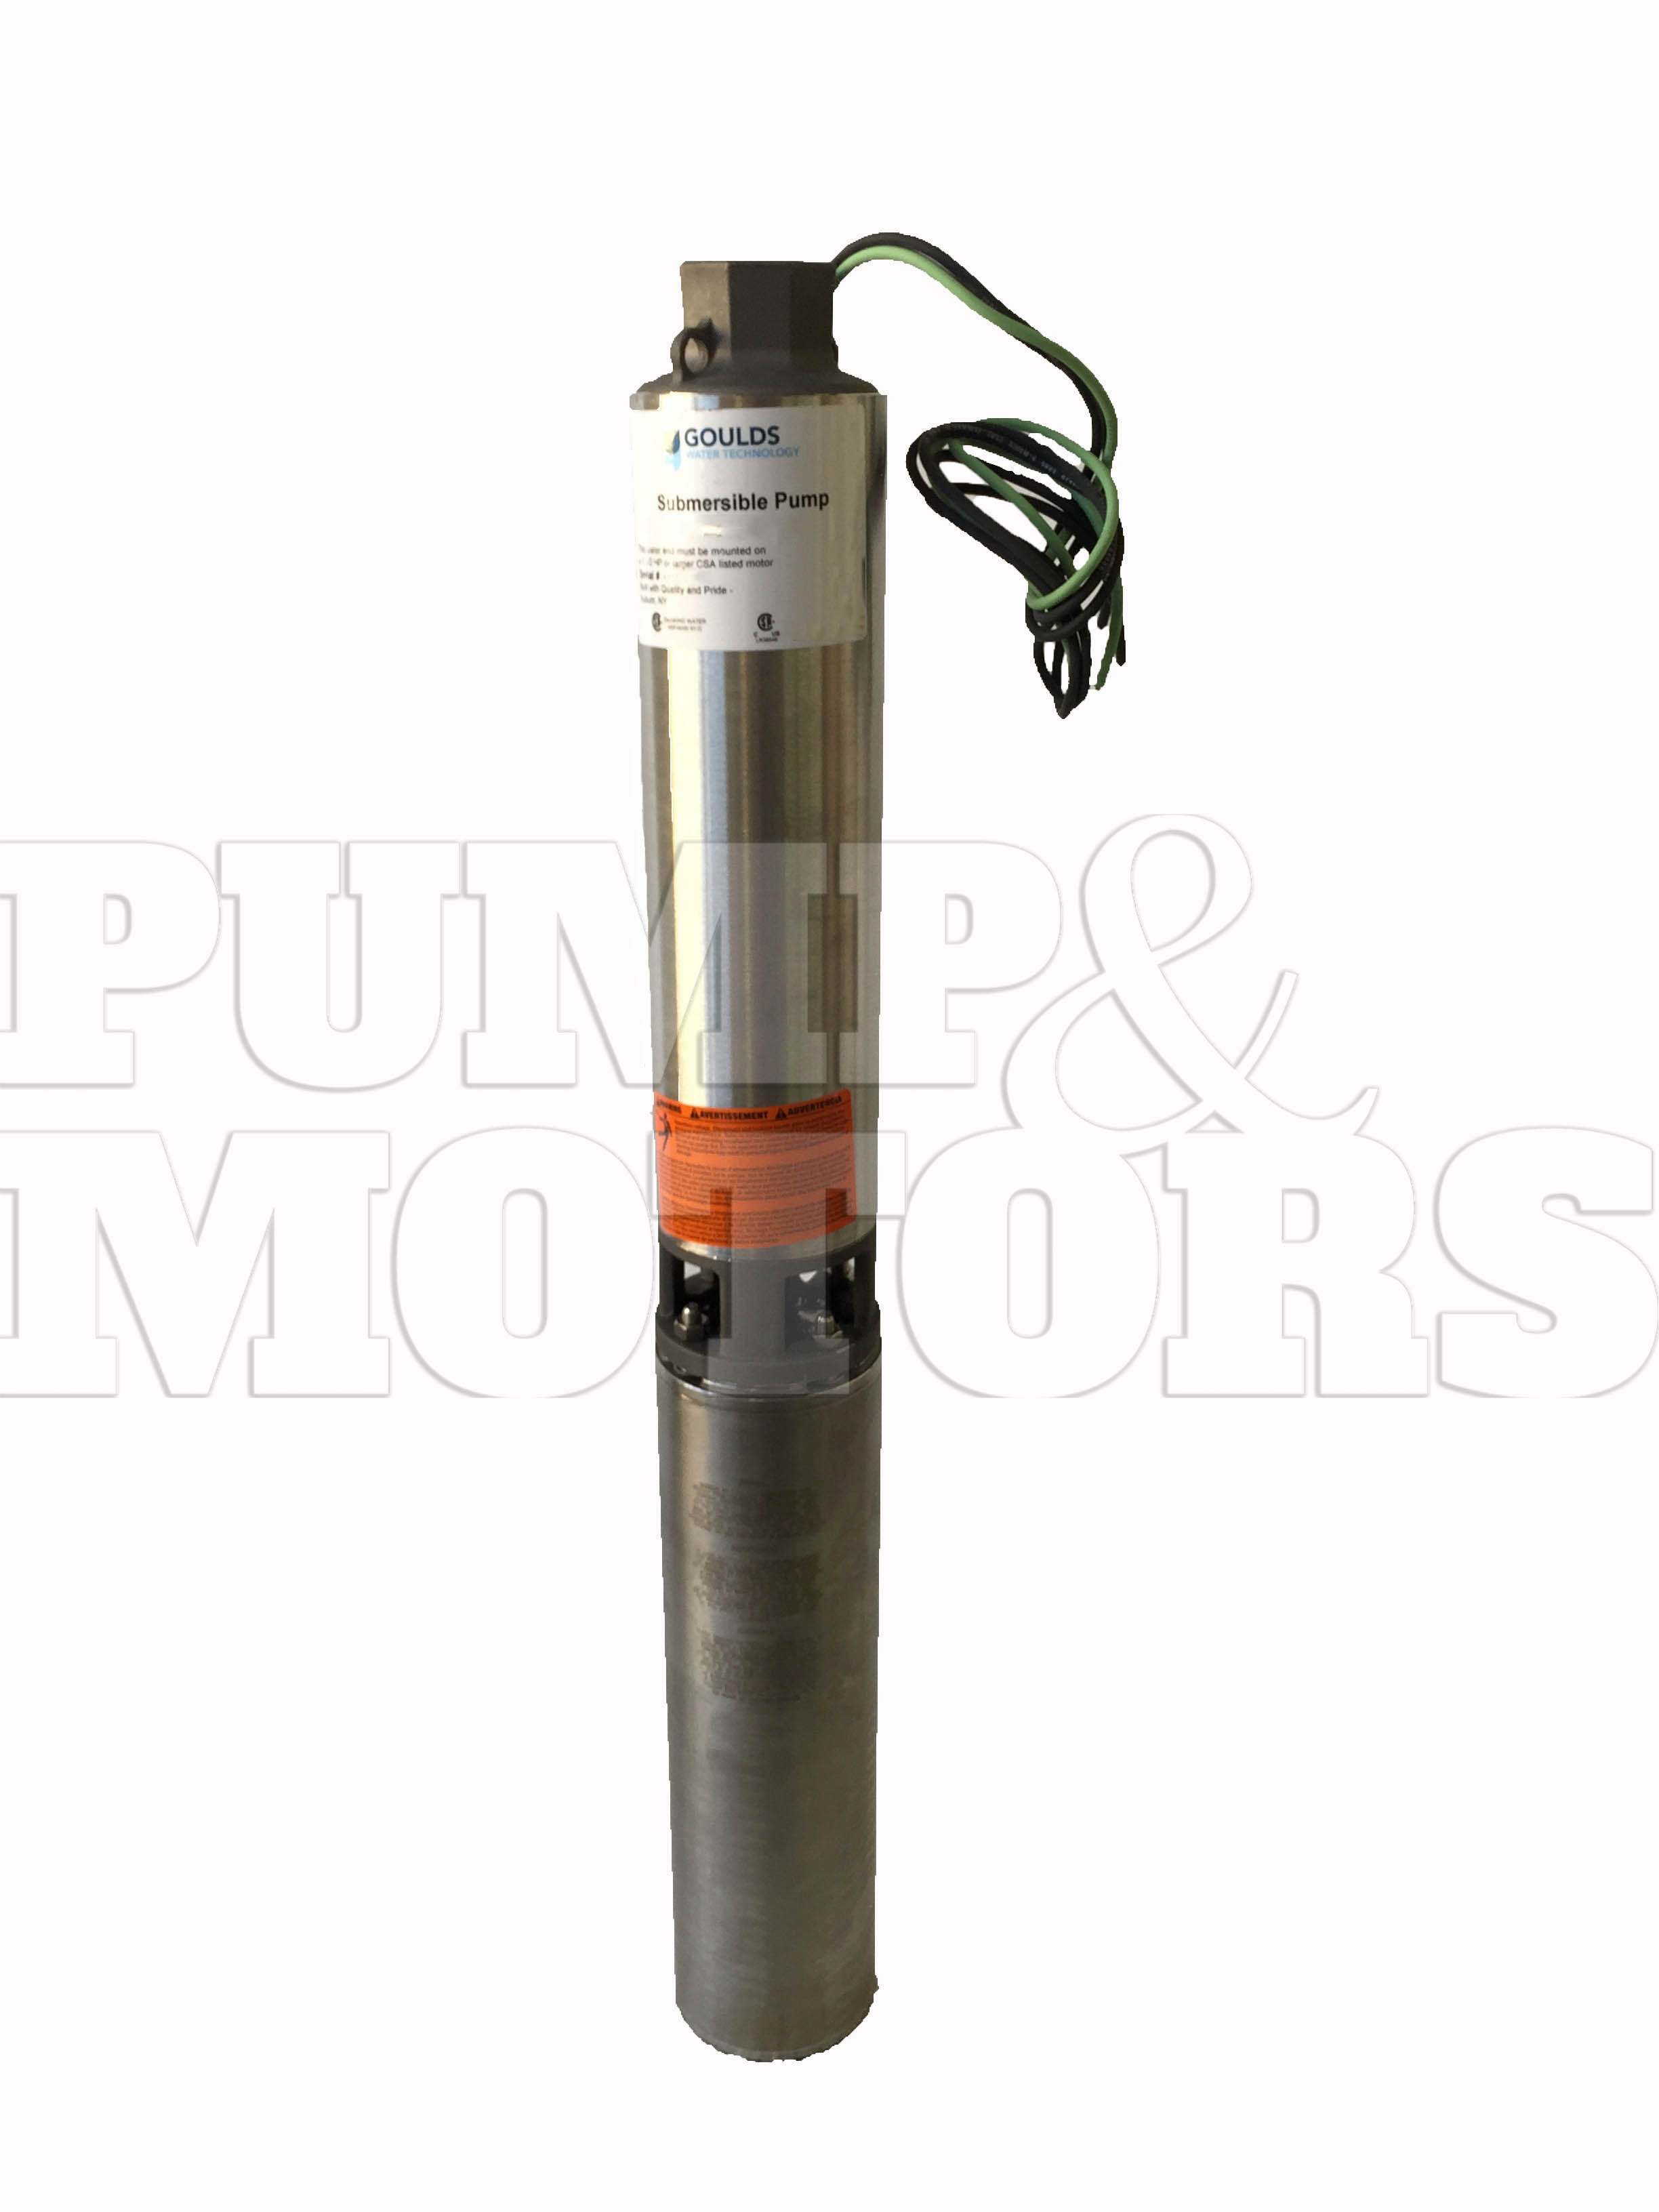 Goulds 13GS07422C 3/4 HP 230V Submersible Water Well Pump 13GPM